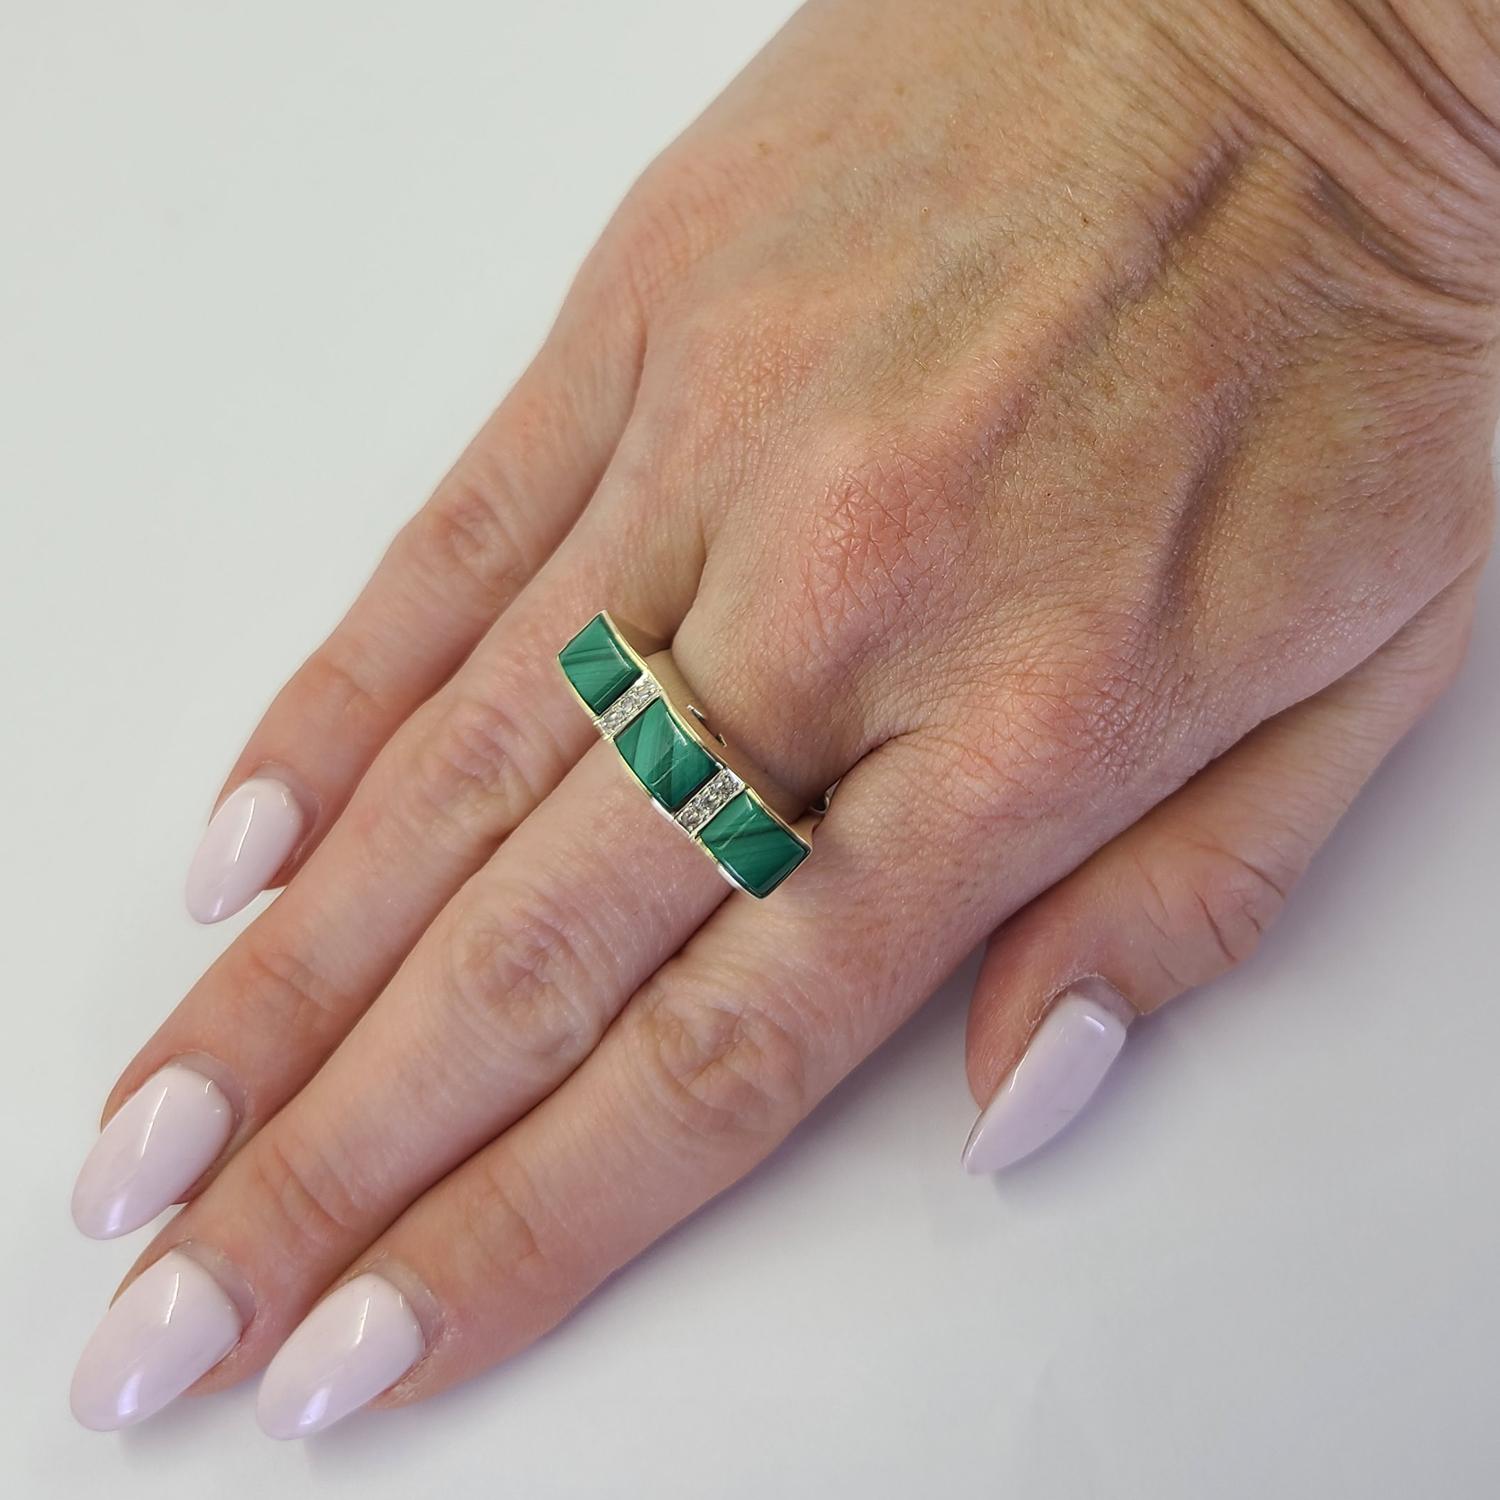 14 Karat Yellow Gold Ring Featuring 3 Malachite Inlays Accented By 6 Single Cut Diamonds of VS Clarity and H Color. Current Finger Size 8; Purchase Includes One Sizing Service Prior to Shipping Upon Request. Finished Weight Is 10 Grams.